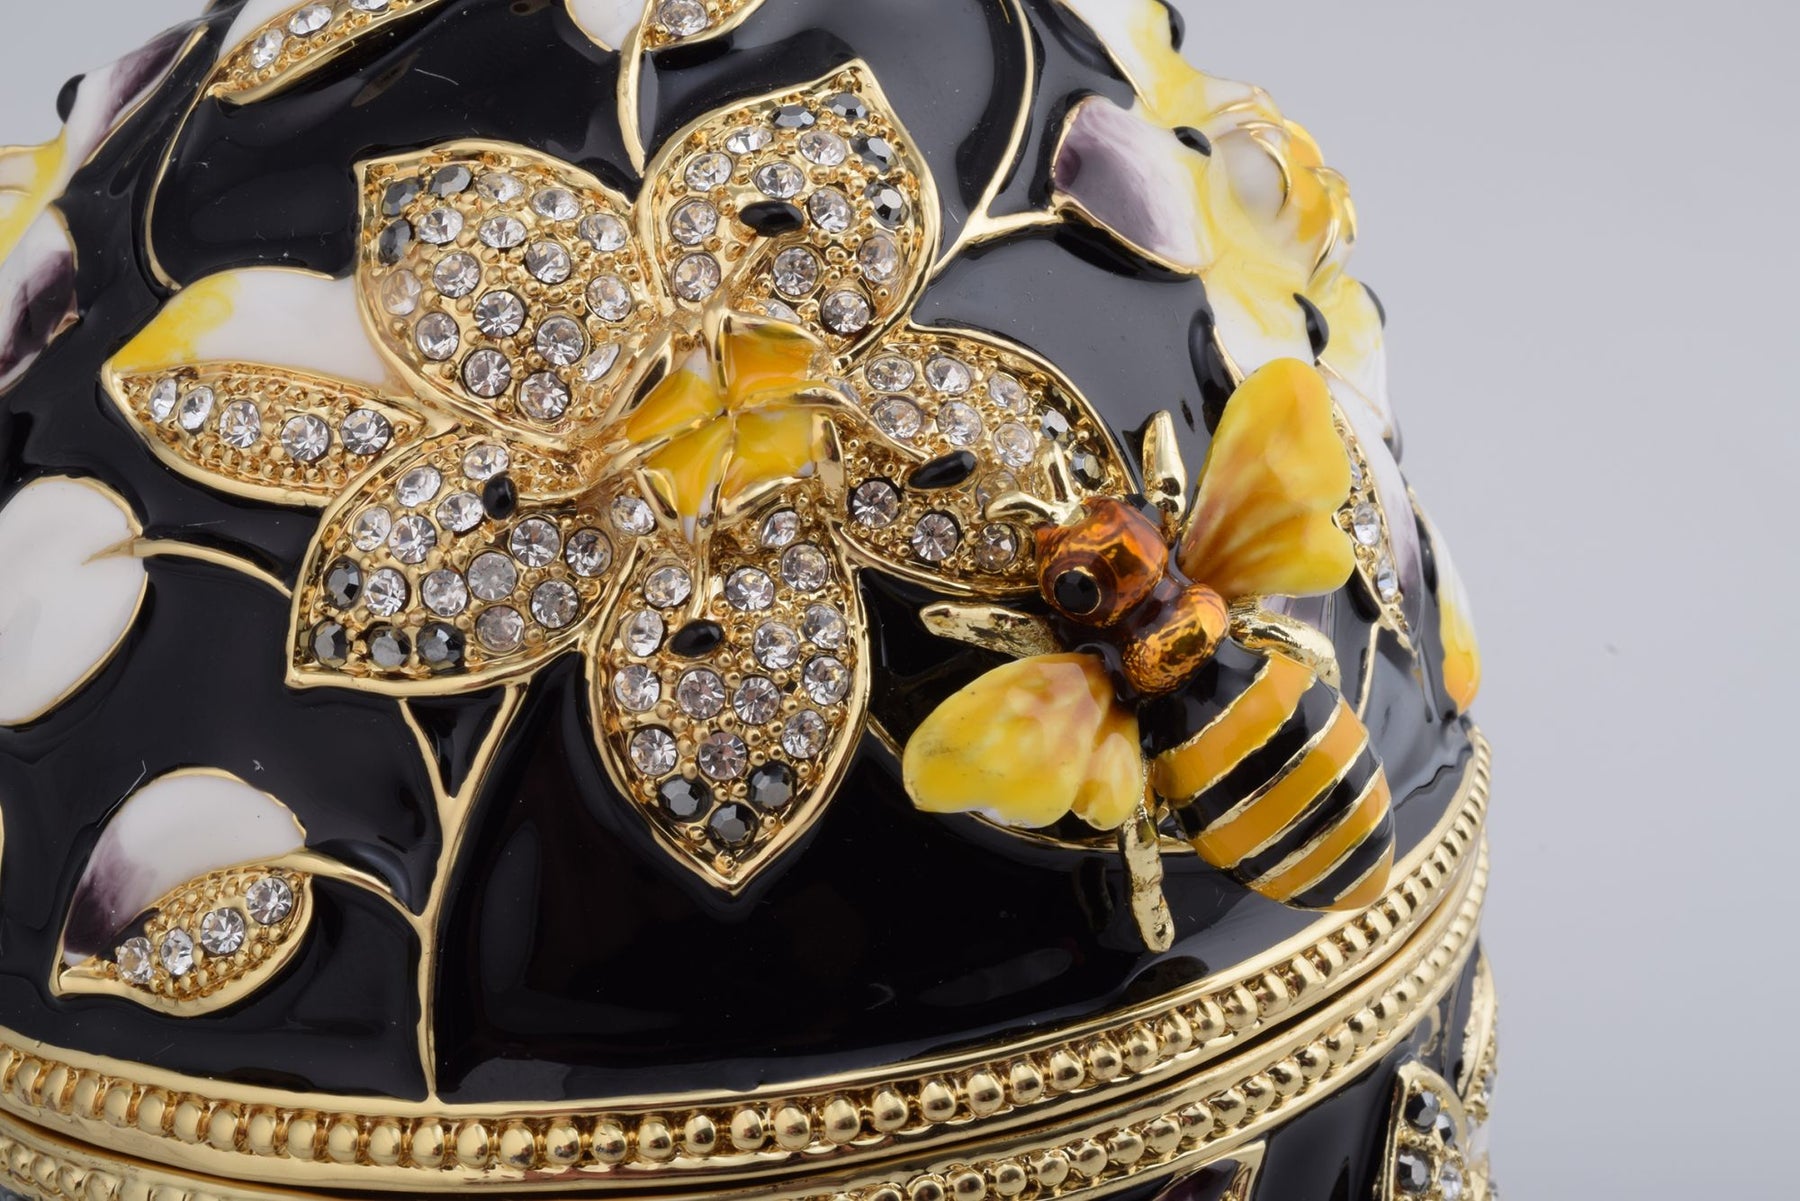 Black Faberge Egg Decorated with Bees and Flowers